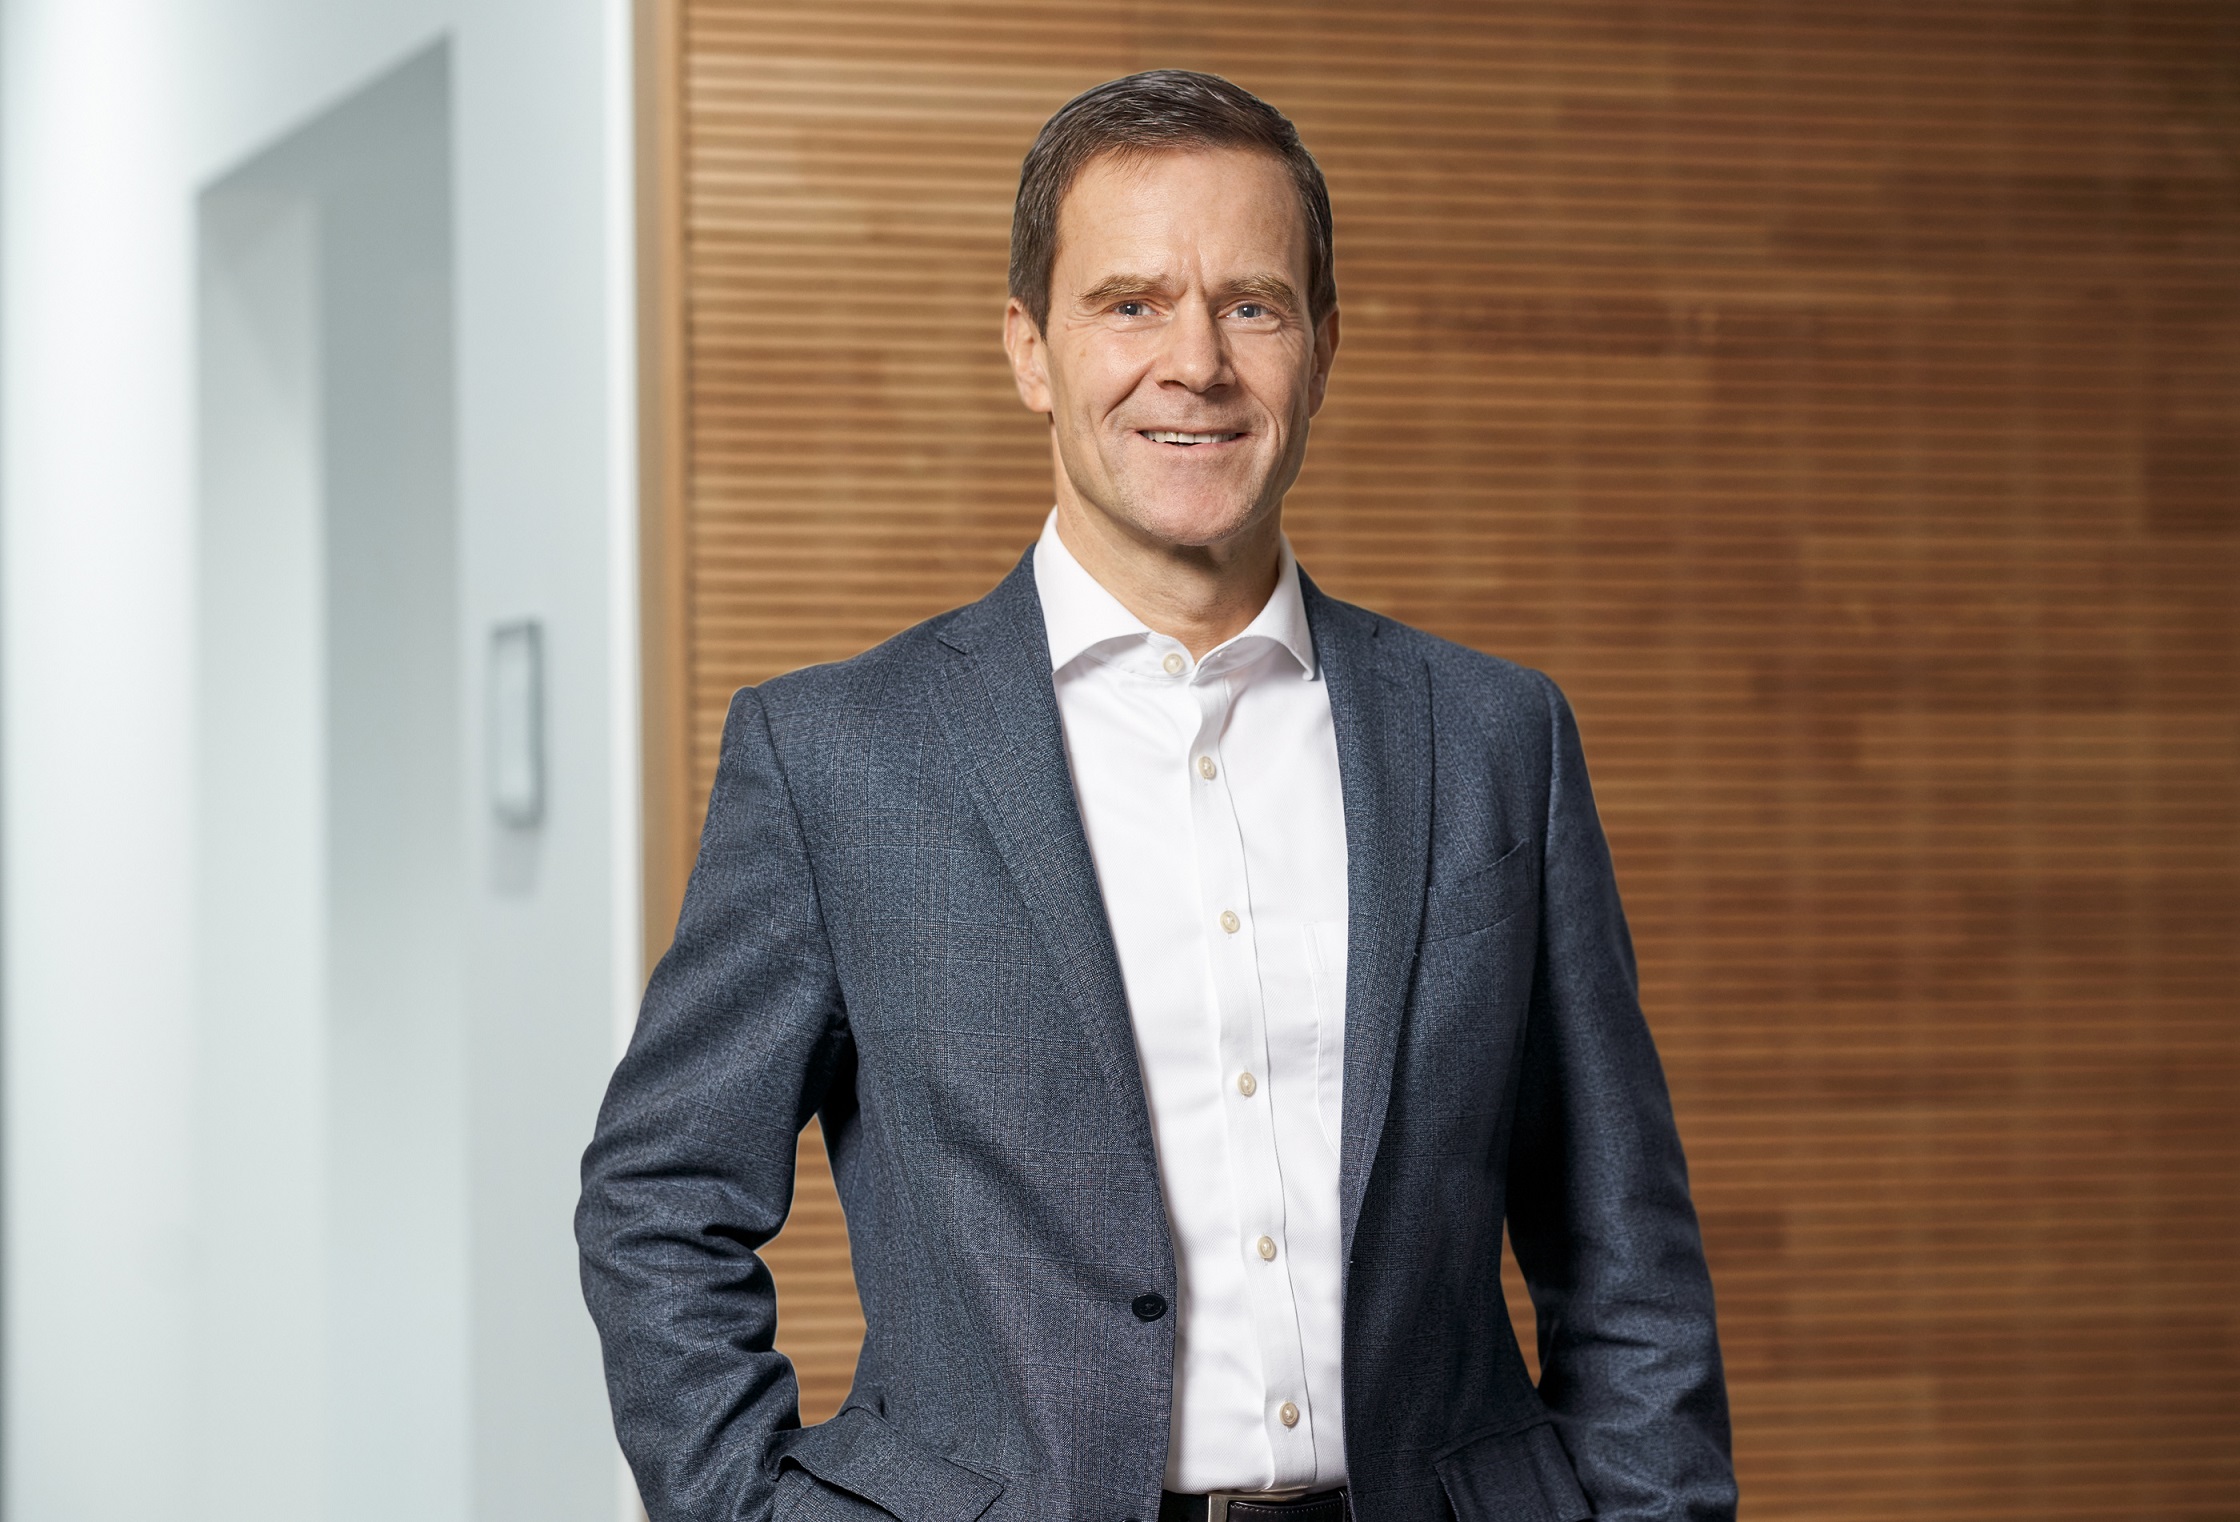 HeidelbergCement chairman Dominik von Achten says the company aims to be carbon neutral by 2050